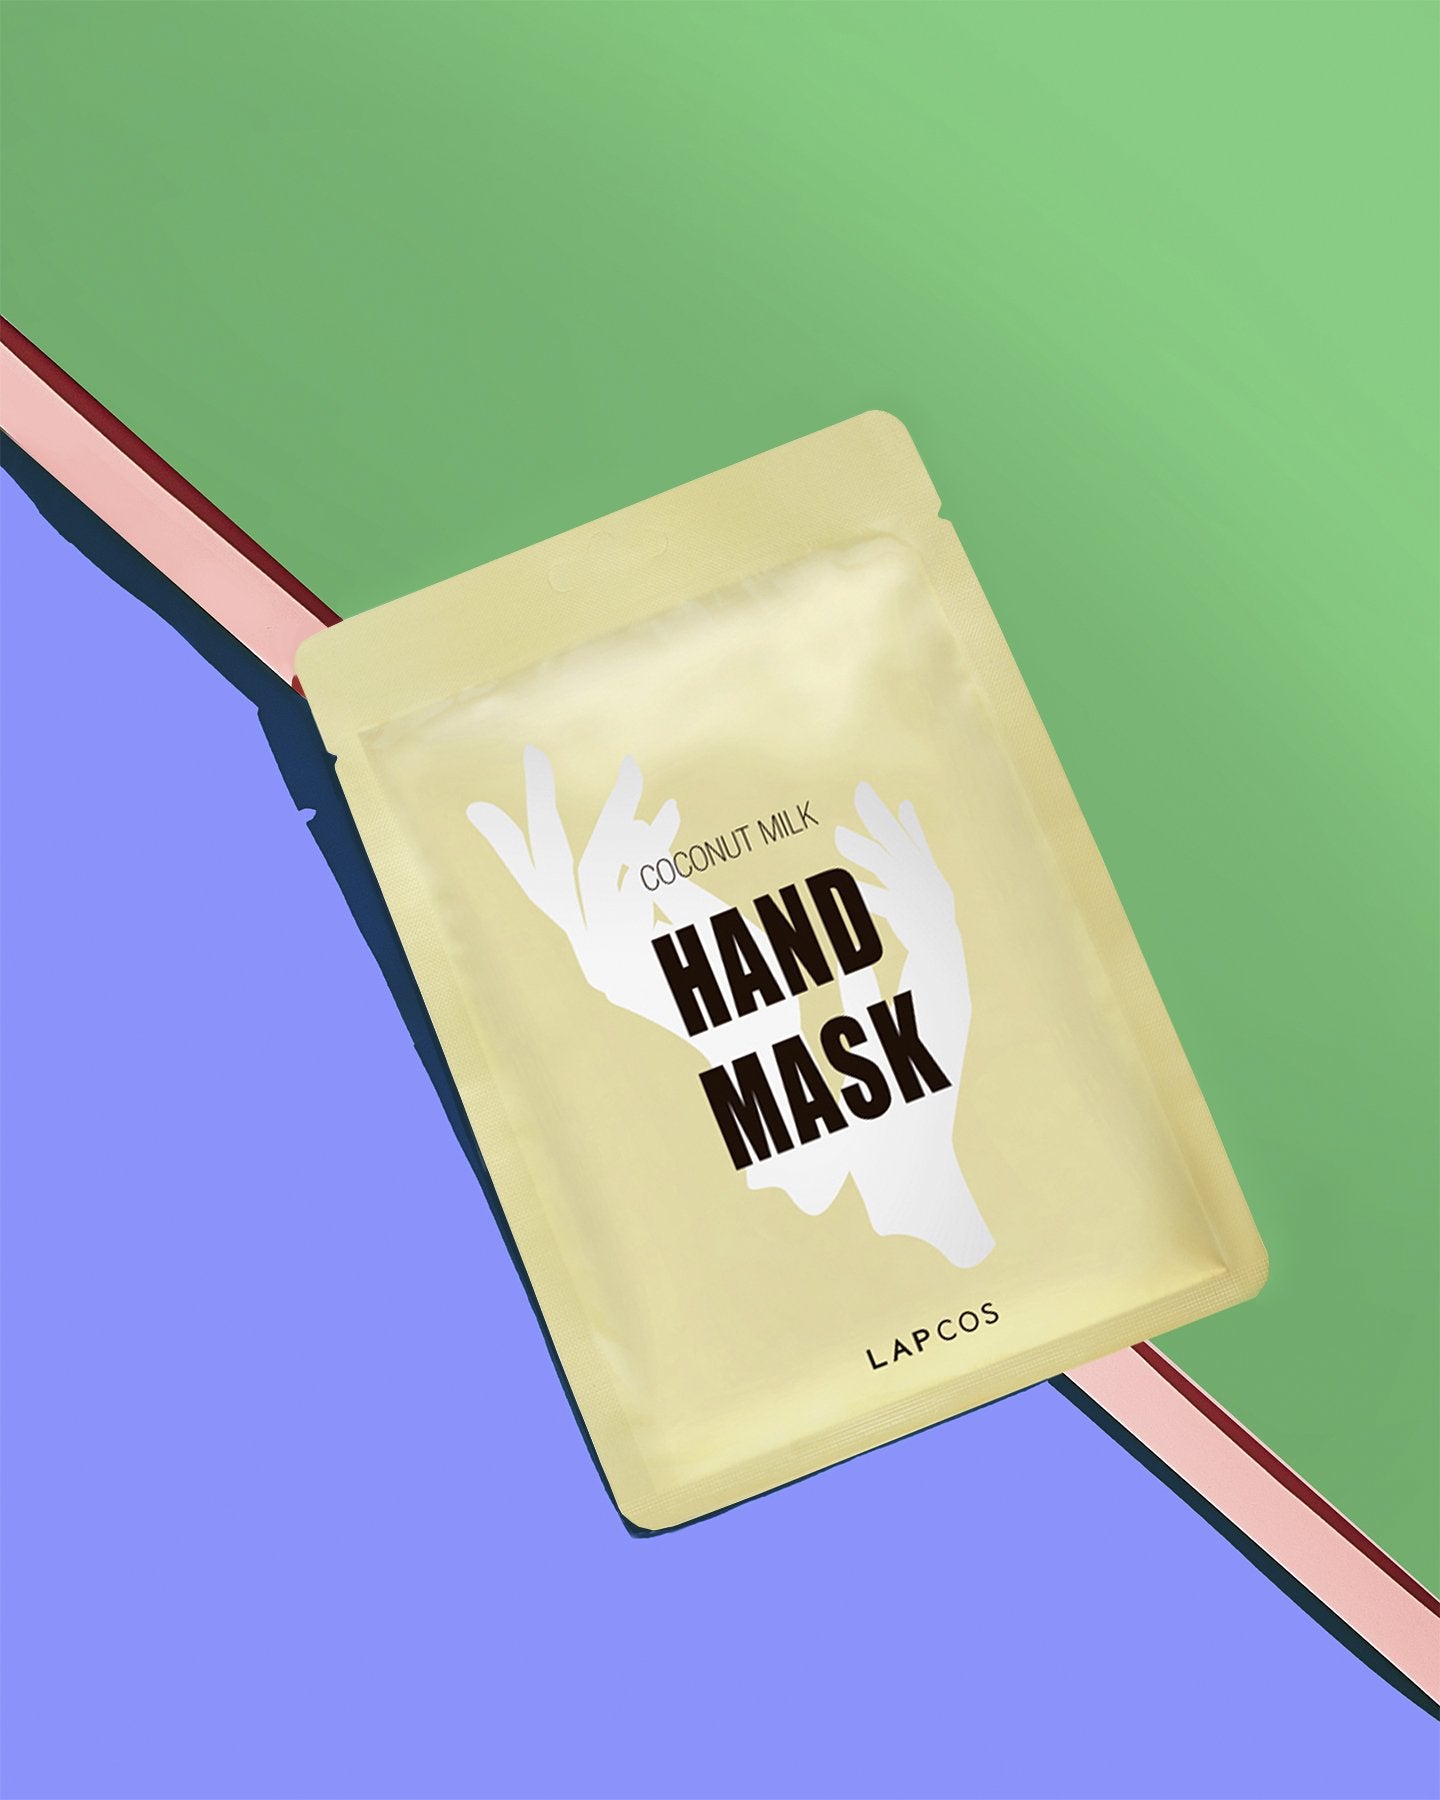 LAPCOS HAND MASK